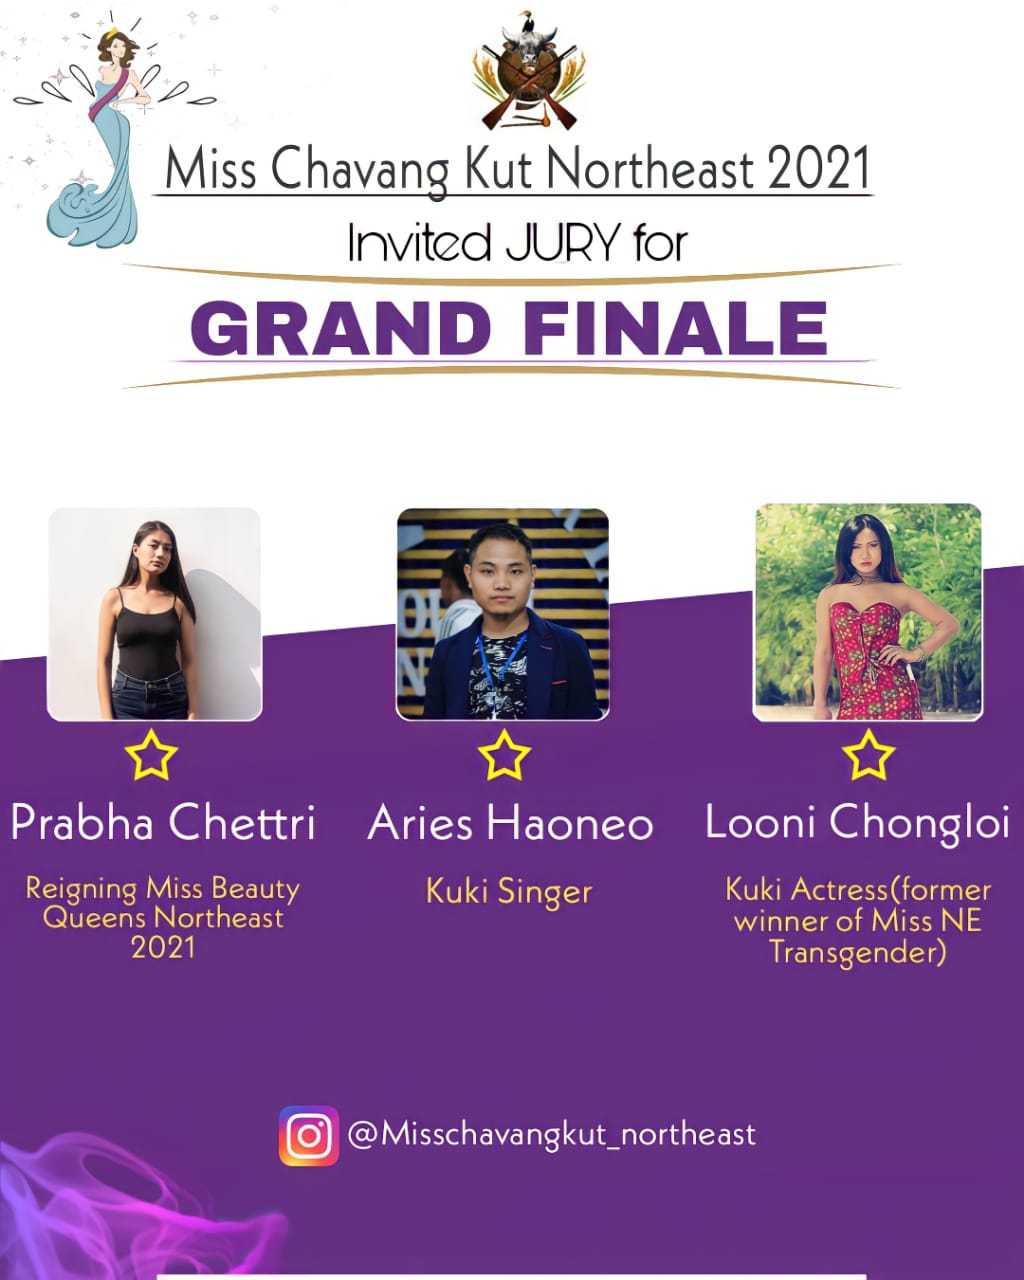  Judges announced for Miss Chavangkut Northeast 2021 Grand Finale 